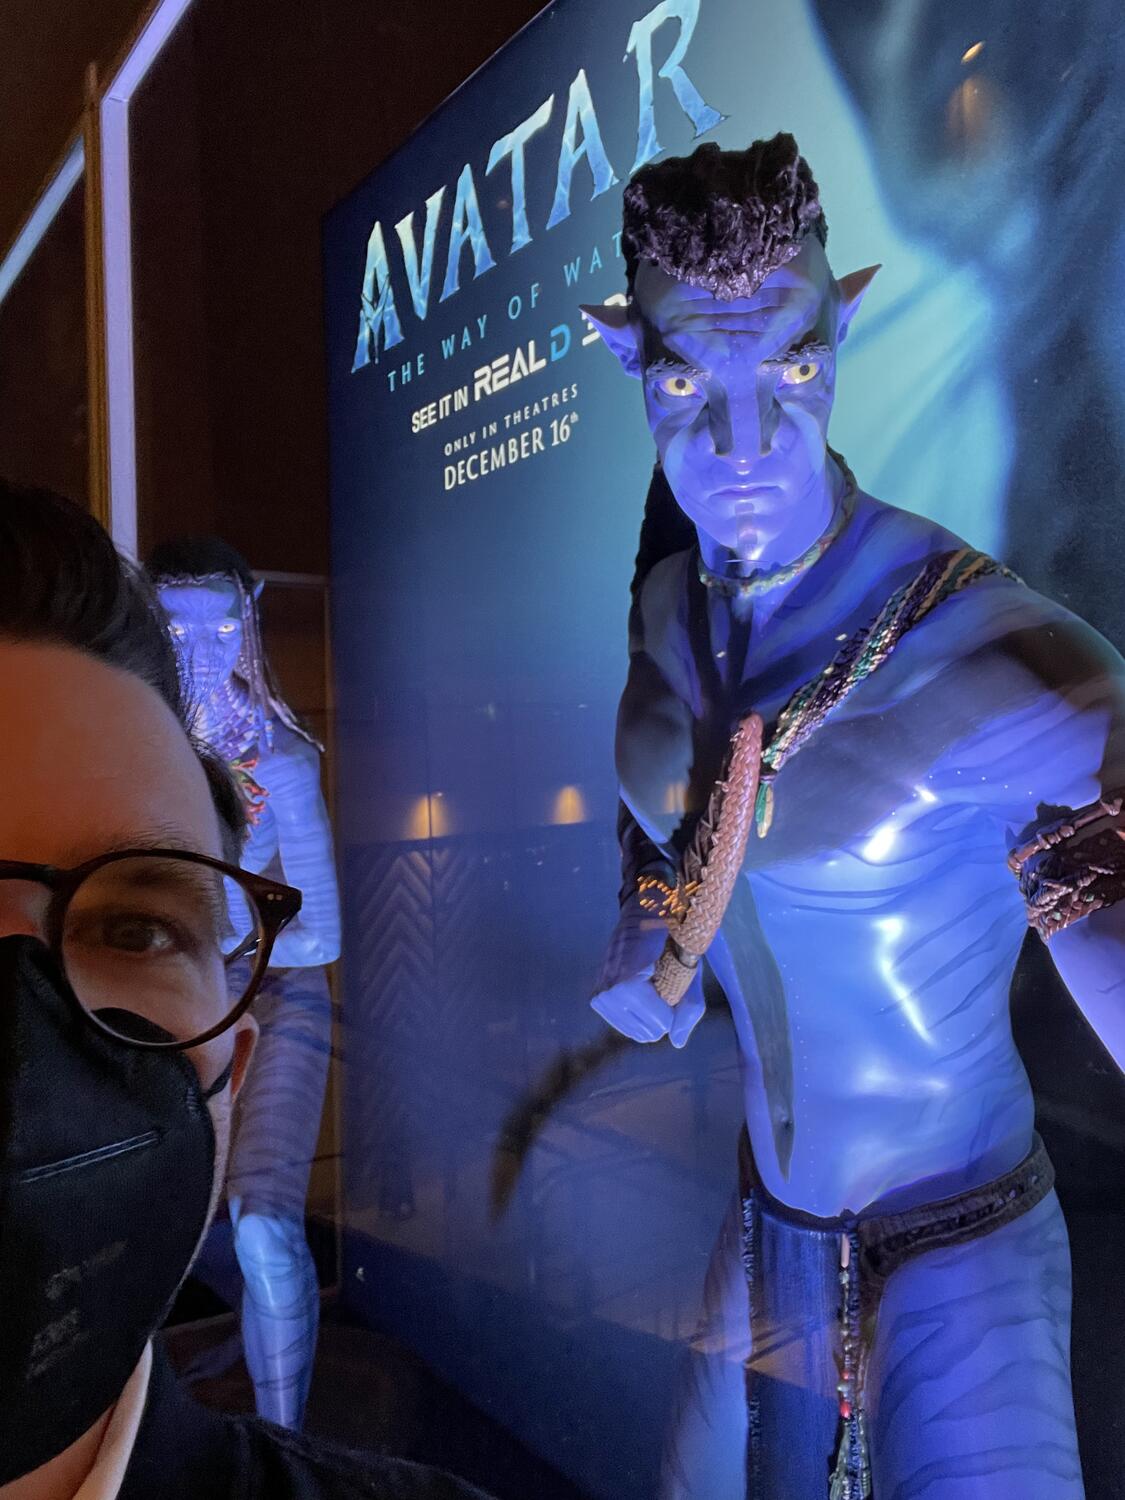 Life-size statues of two characters from Avatar in front of a large poster for the new movie